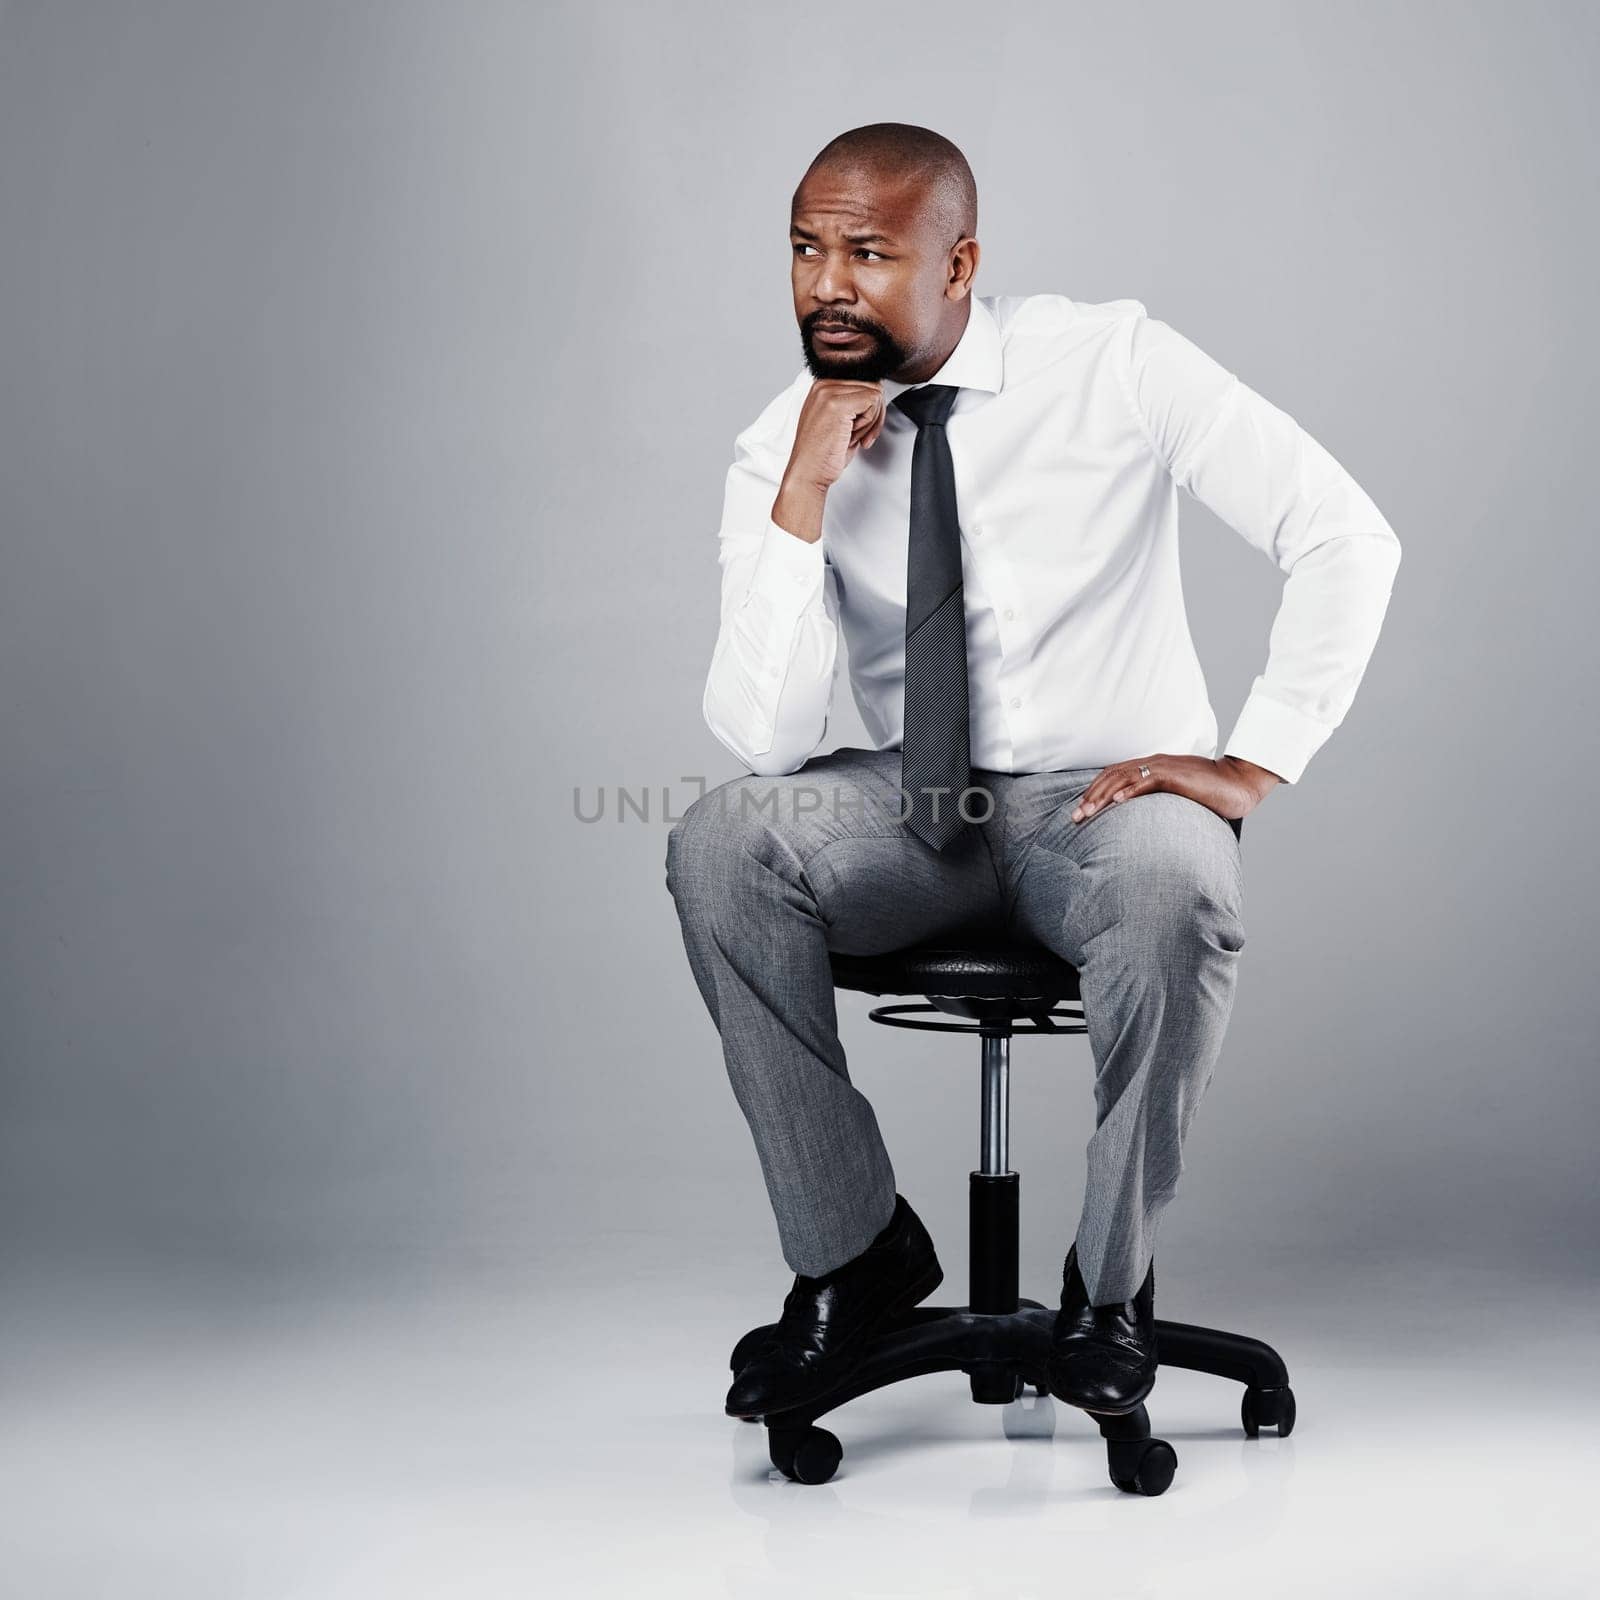 The price of success is hard work and determination. Studio shot of a corporate businessman sitting on a chair against a grey background